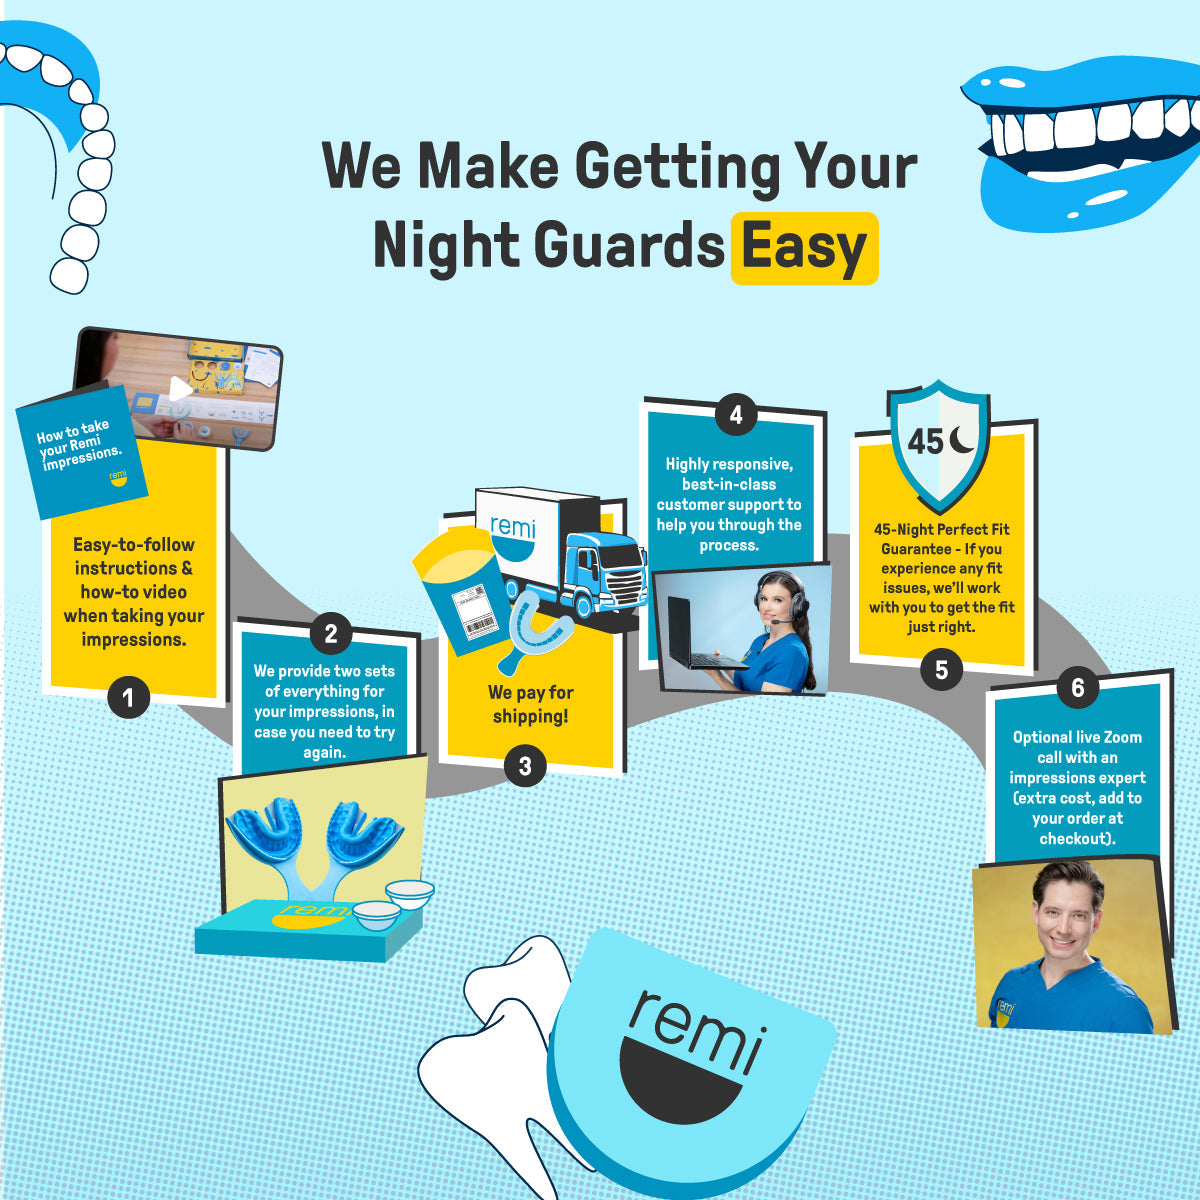 Infographic explaining the process of getting dental-grade quality Custom Night Guards from remi, featuring steps with corresponding images and icons, highlighted in blue and yellow.